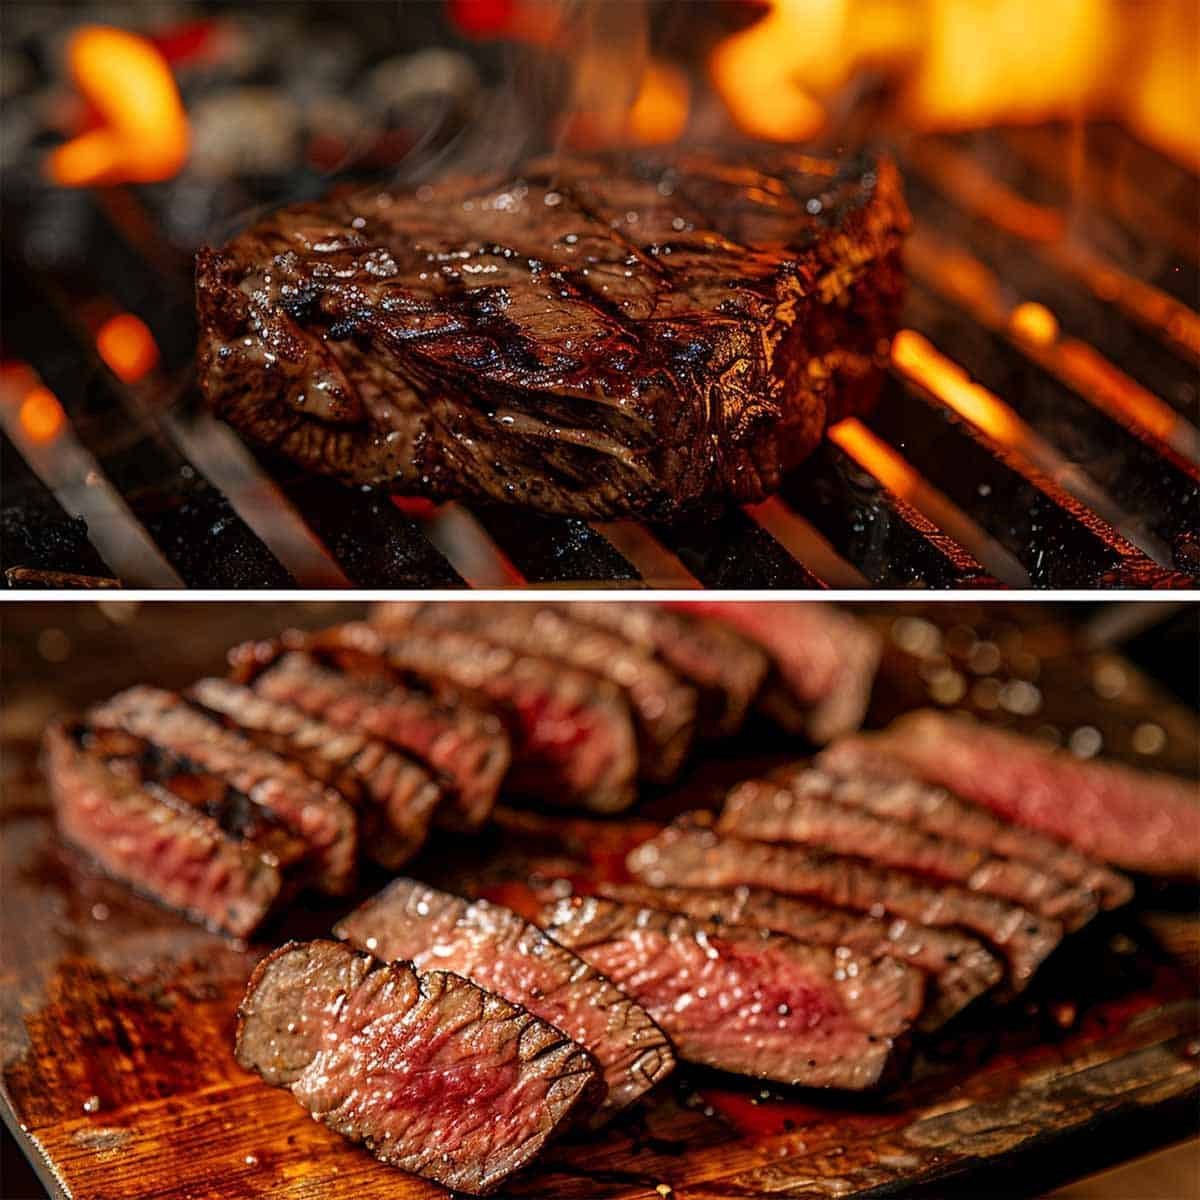 Two-part image: one side grilling beef over flames, other side slicing grilled beef on a cutting board 